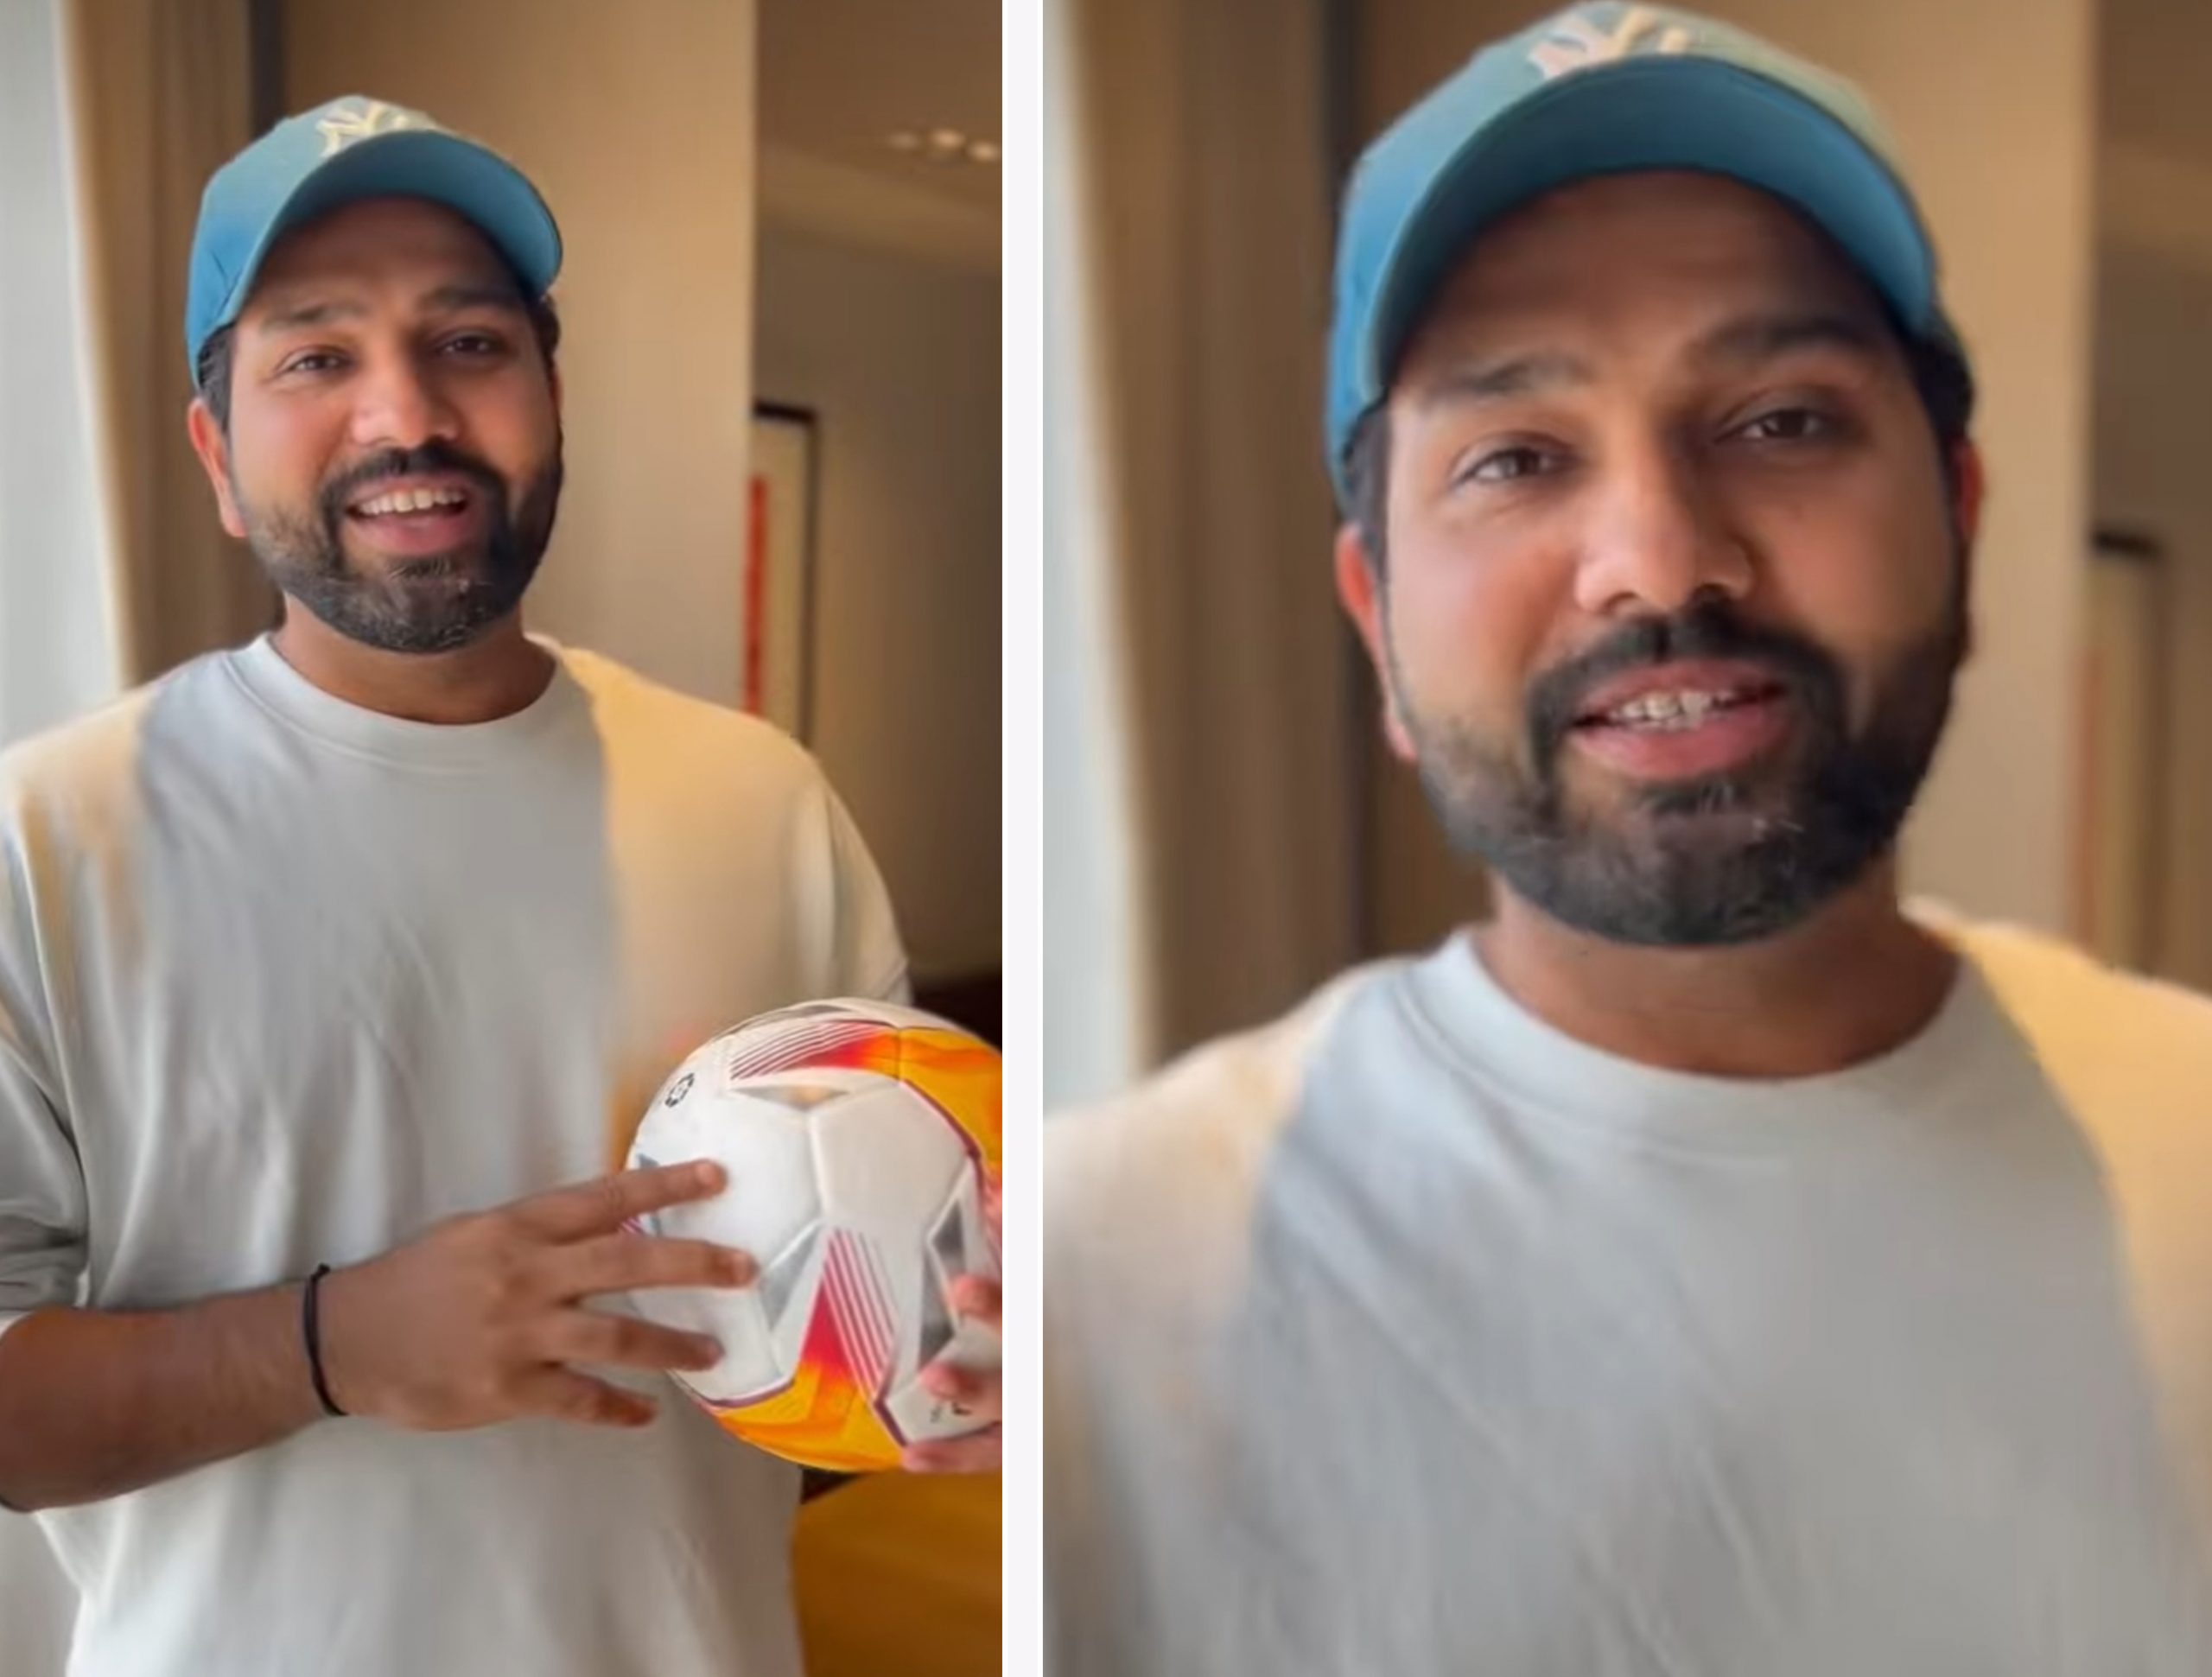 [Watch] Rohit Sharma’s Hilarious ‘Happy Holi’ Video For Fans